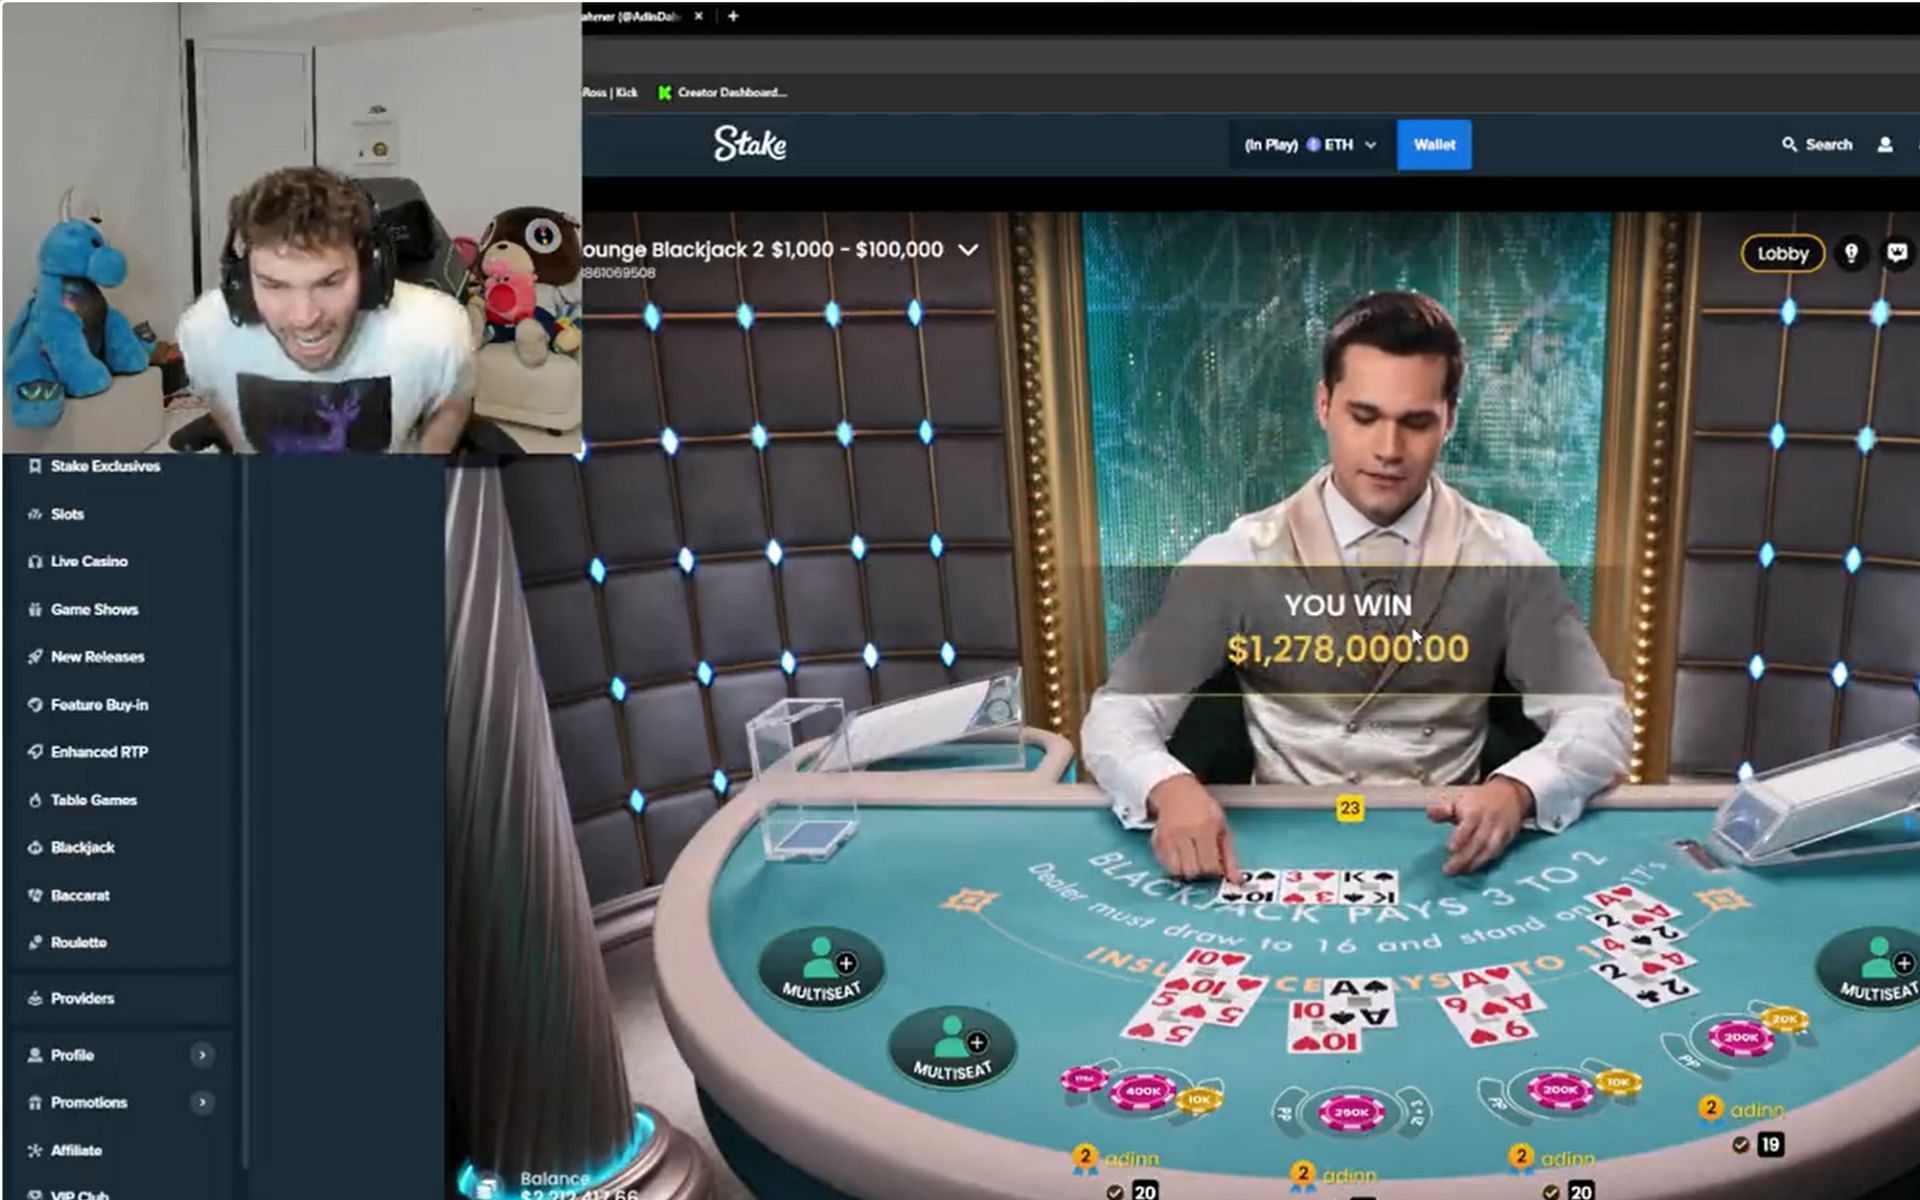 This is all paid promotion - Adin Ross winning $1.2 million on Blackjack  leaves fans skeptical